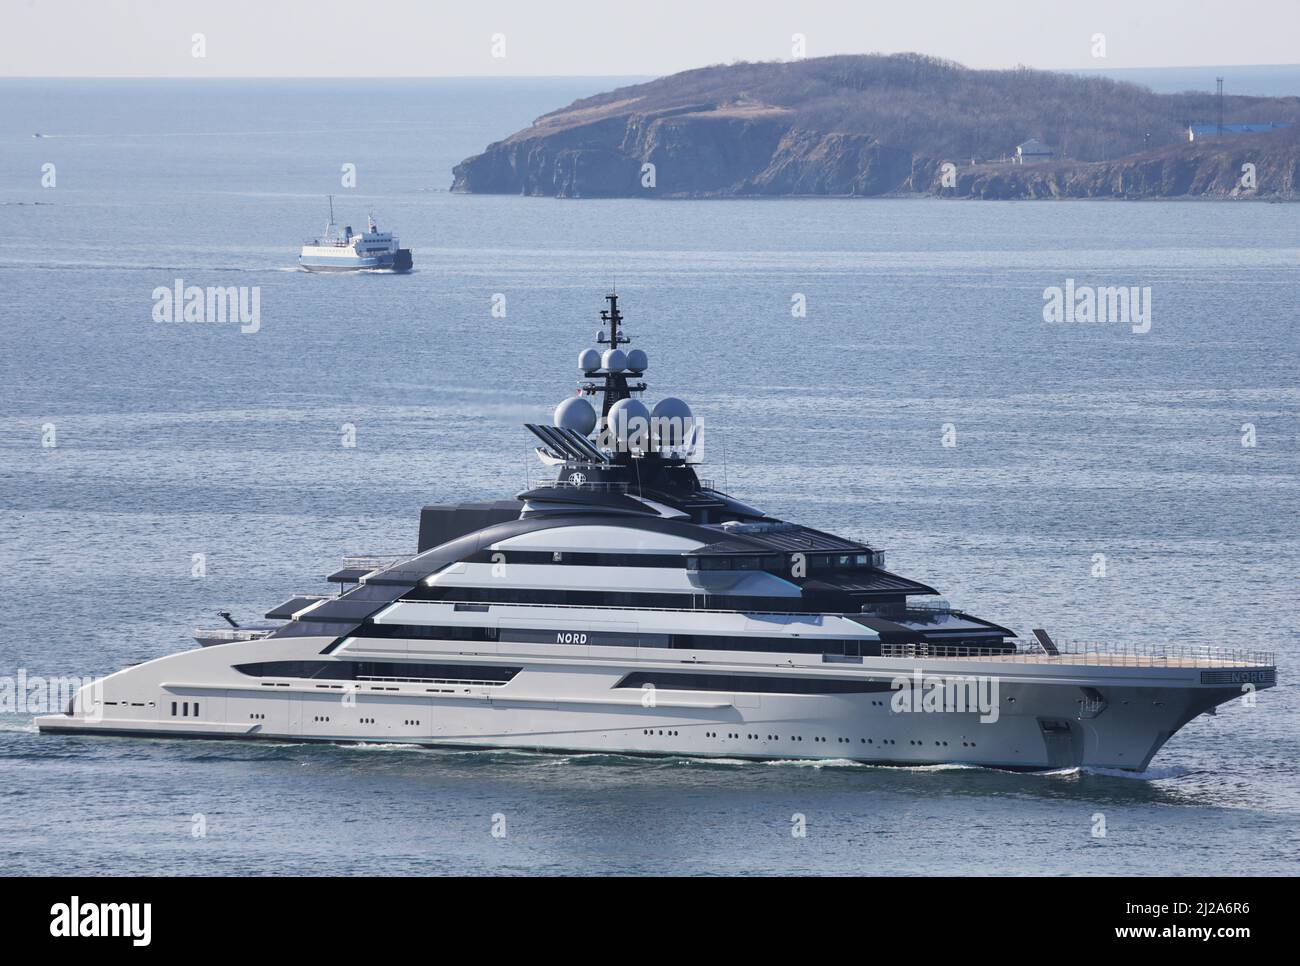 The superyacht Nord, reportedly owned by the sanctioned Russian oligarch Alexei Mordashov, arrives in the far eastern port of Vladivostok, Russia March 31, 2022. REUTERS/REUTERS PHOTOGRAPHER Stock Photo